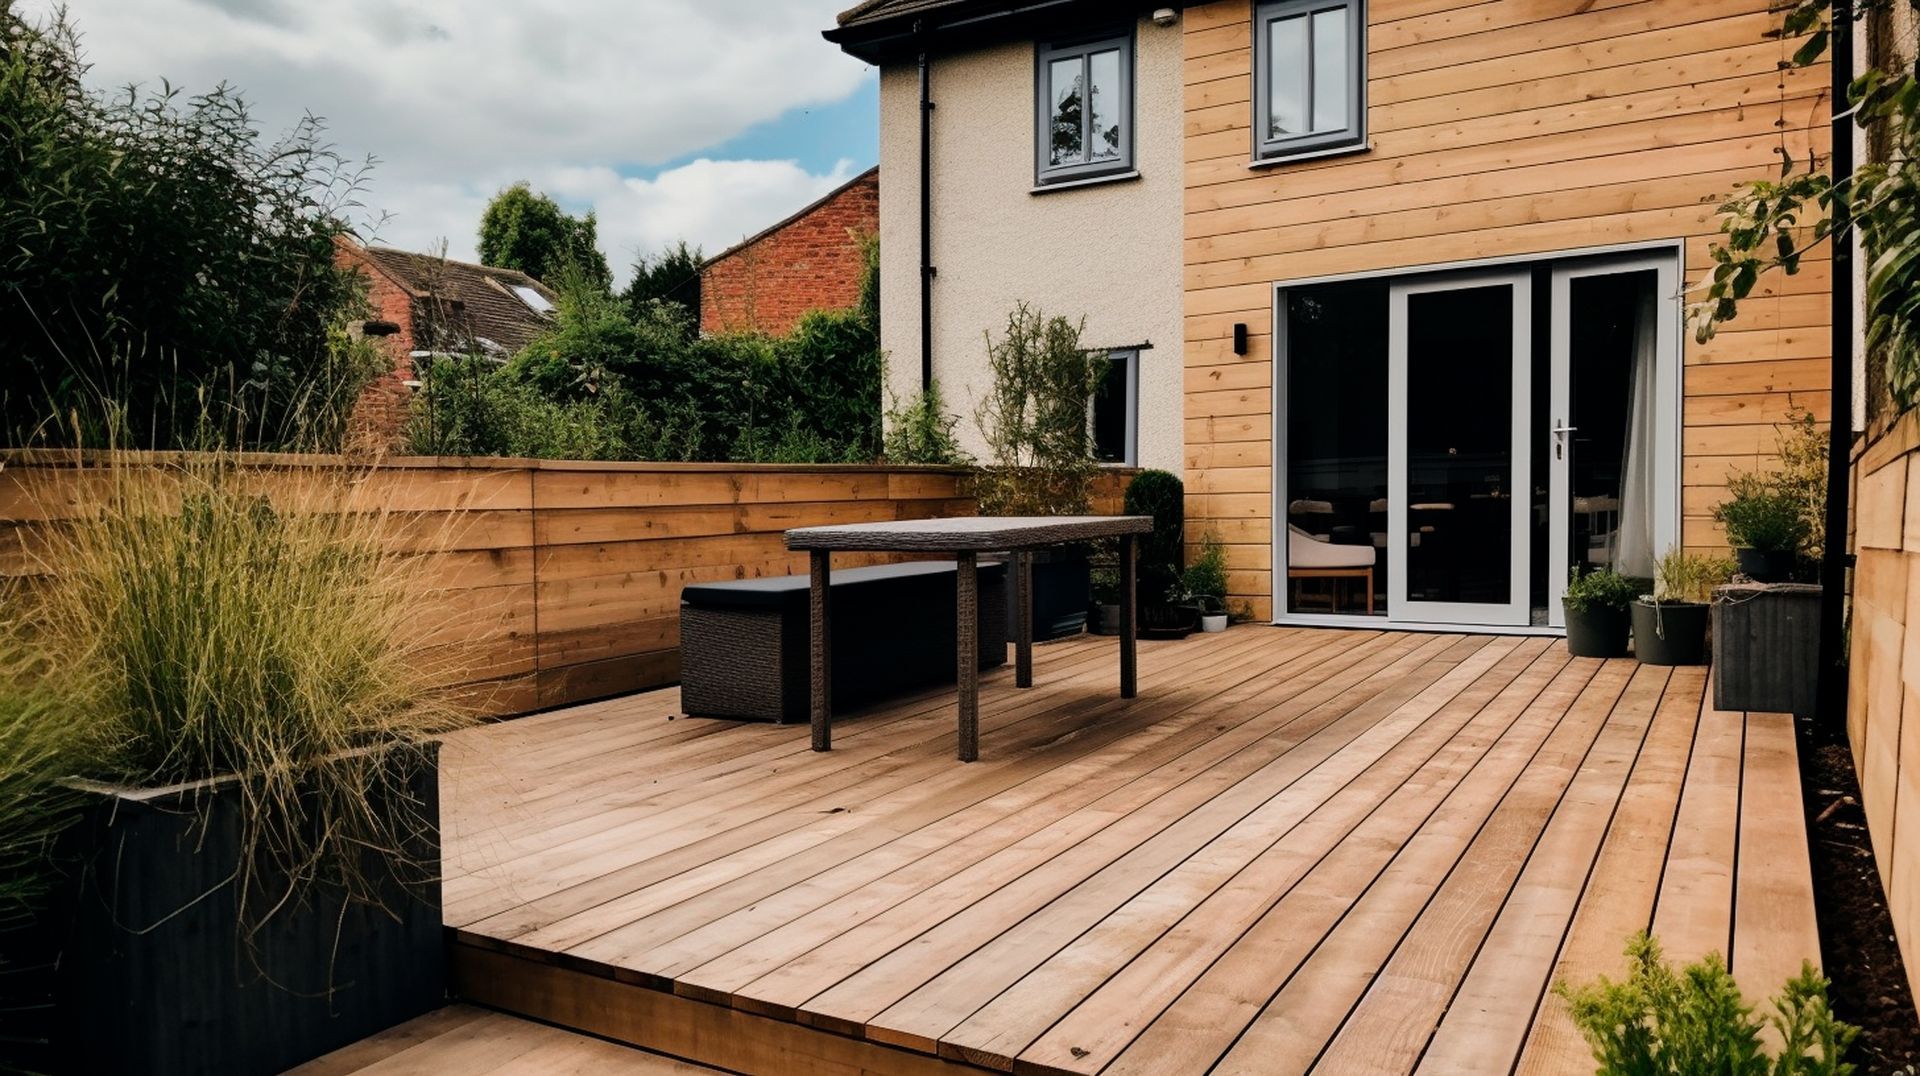 exterior back garden patio area with wood decking